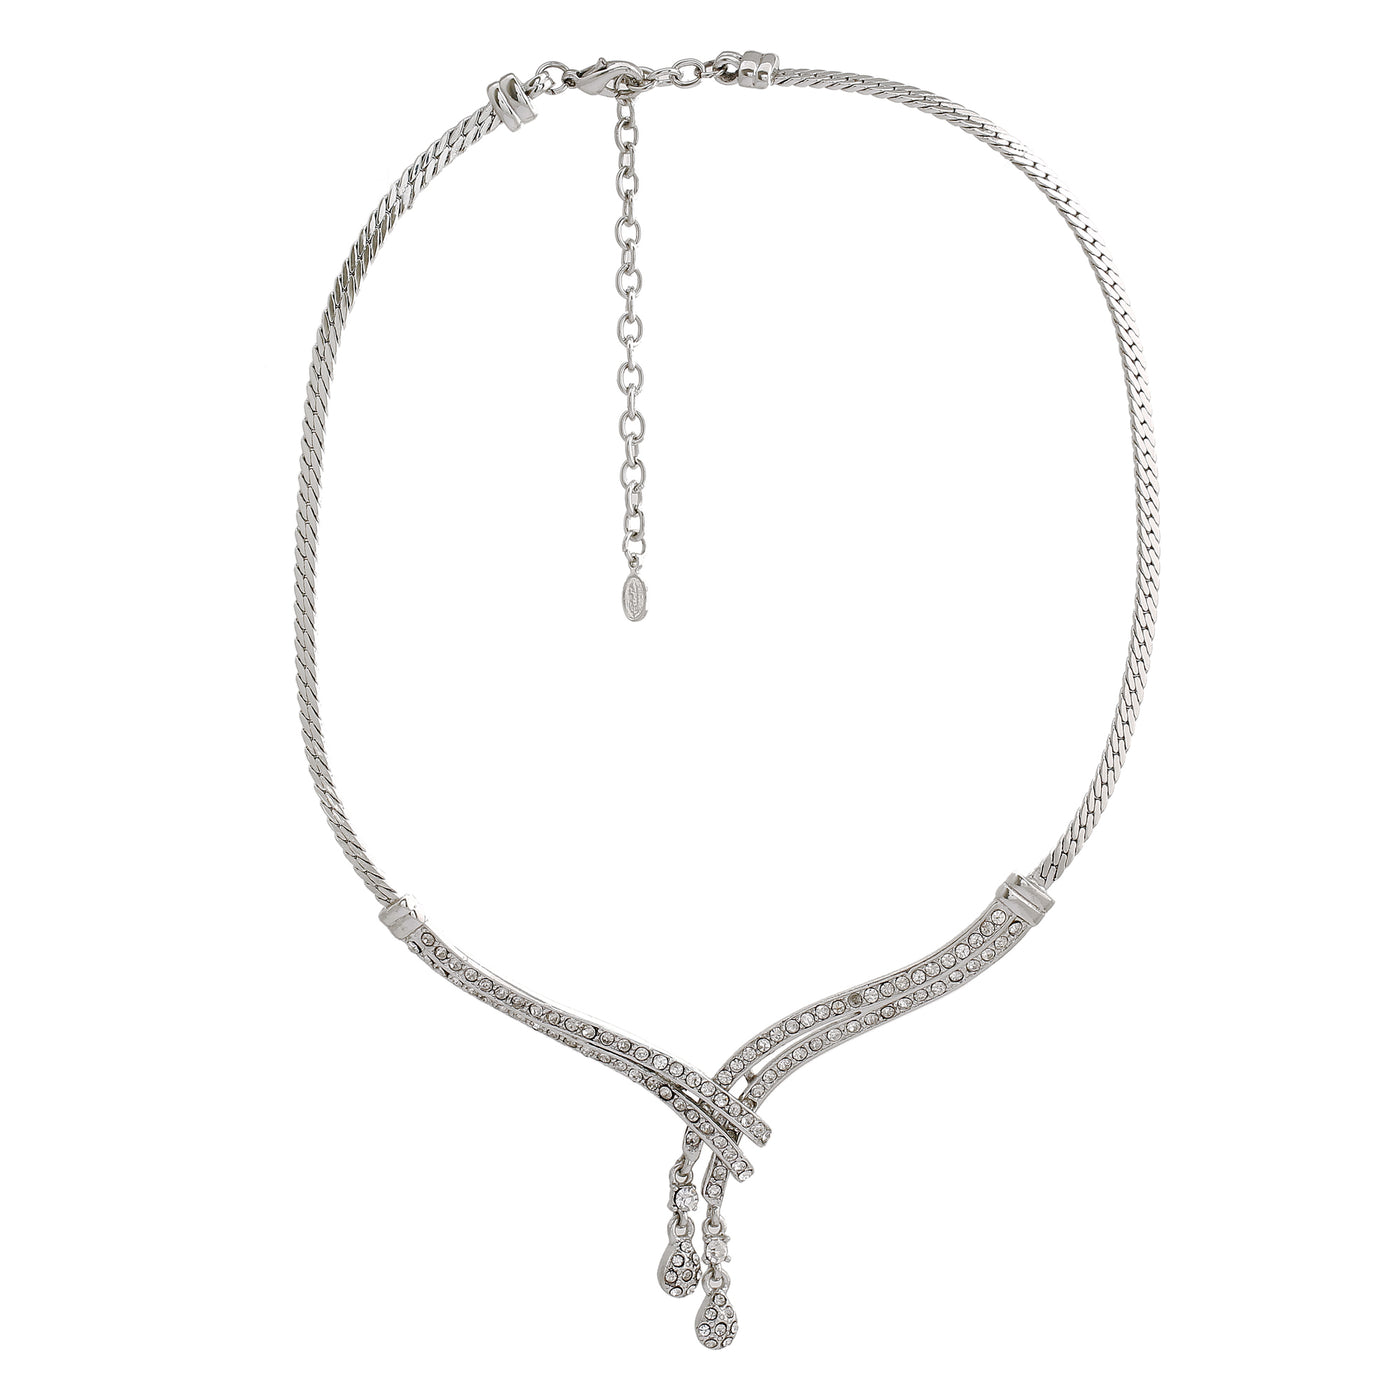 Estele Rhodium Plated Classic Medley Necklace Set with Crystals for Women